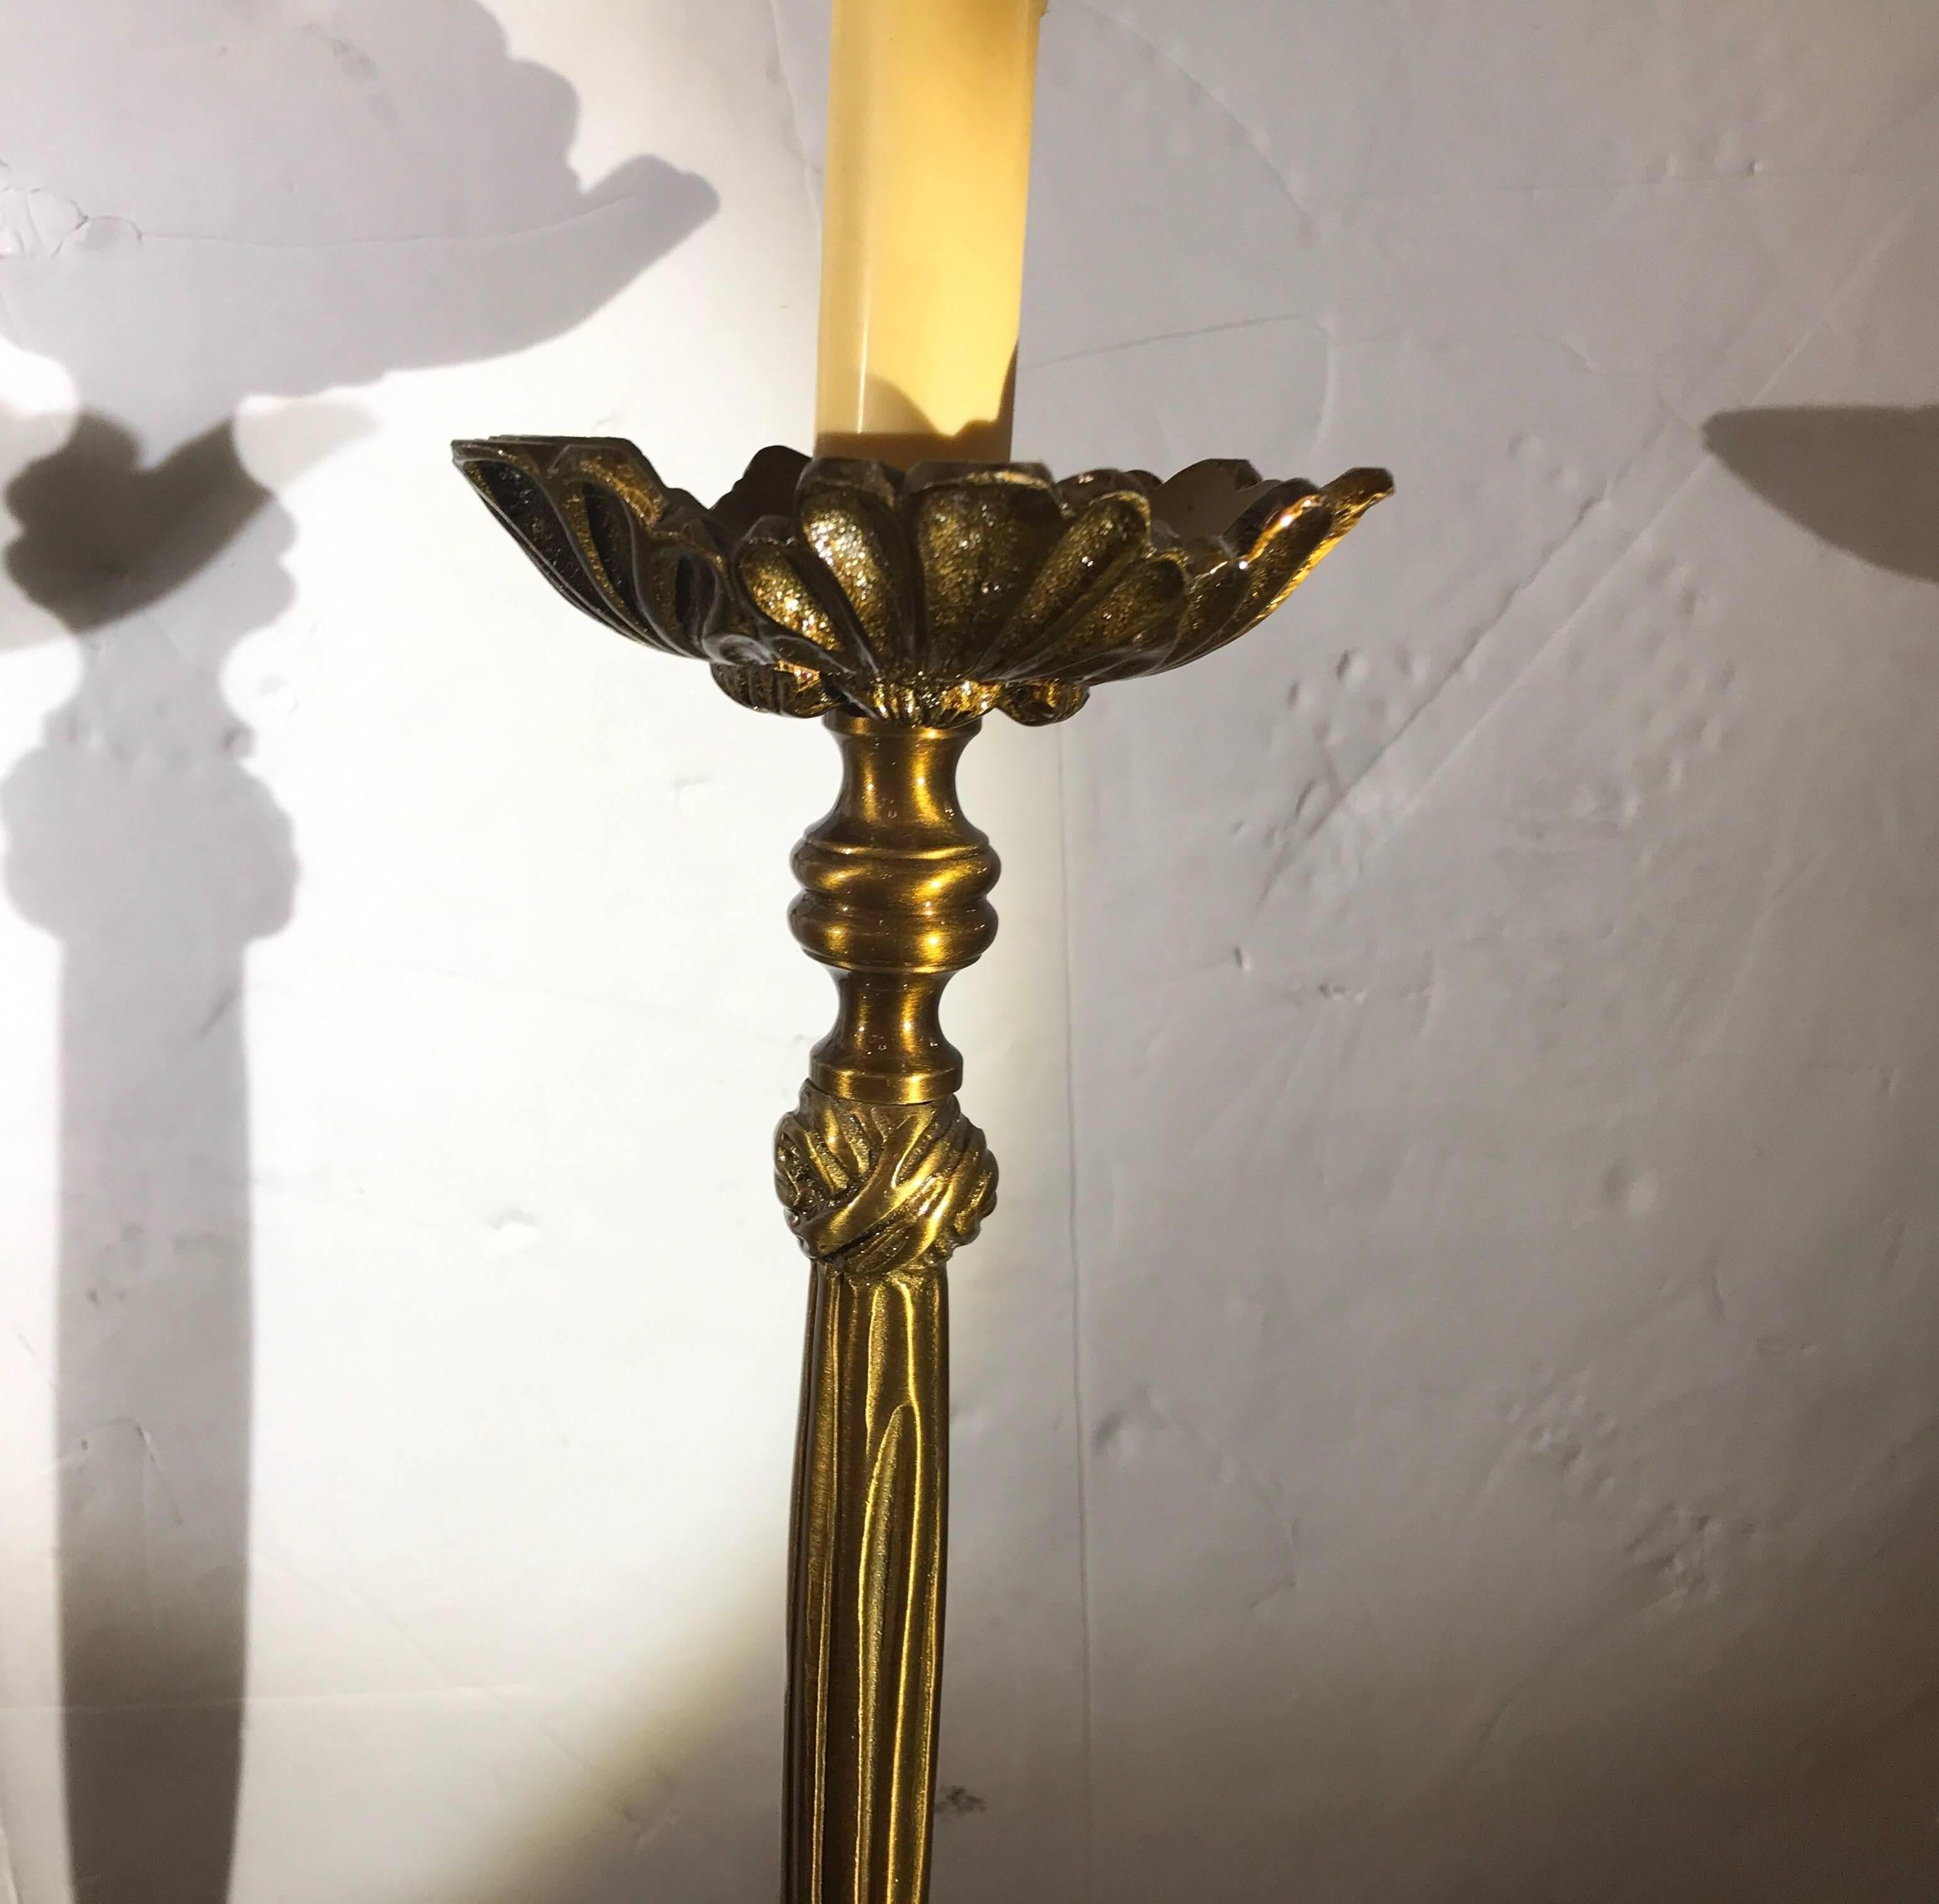 Elegant pair of cast brass tall buffet or console lamps with silk shantung scalloped shades. The finish is an aged gilt bronze. Excellent condition with clean safe wiring made for Chelsea House. The lamps with shades are 32 inches tall, the lamps to